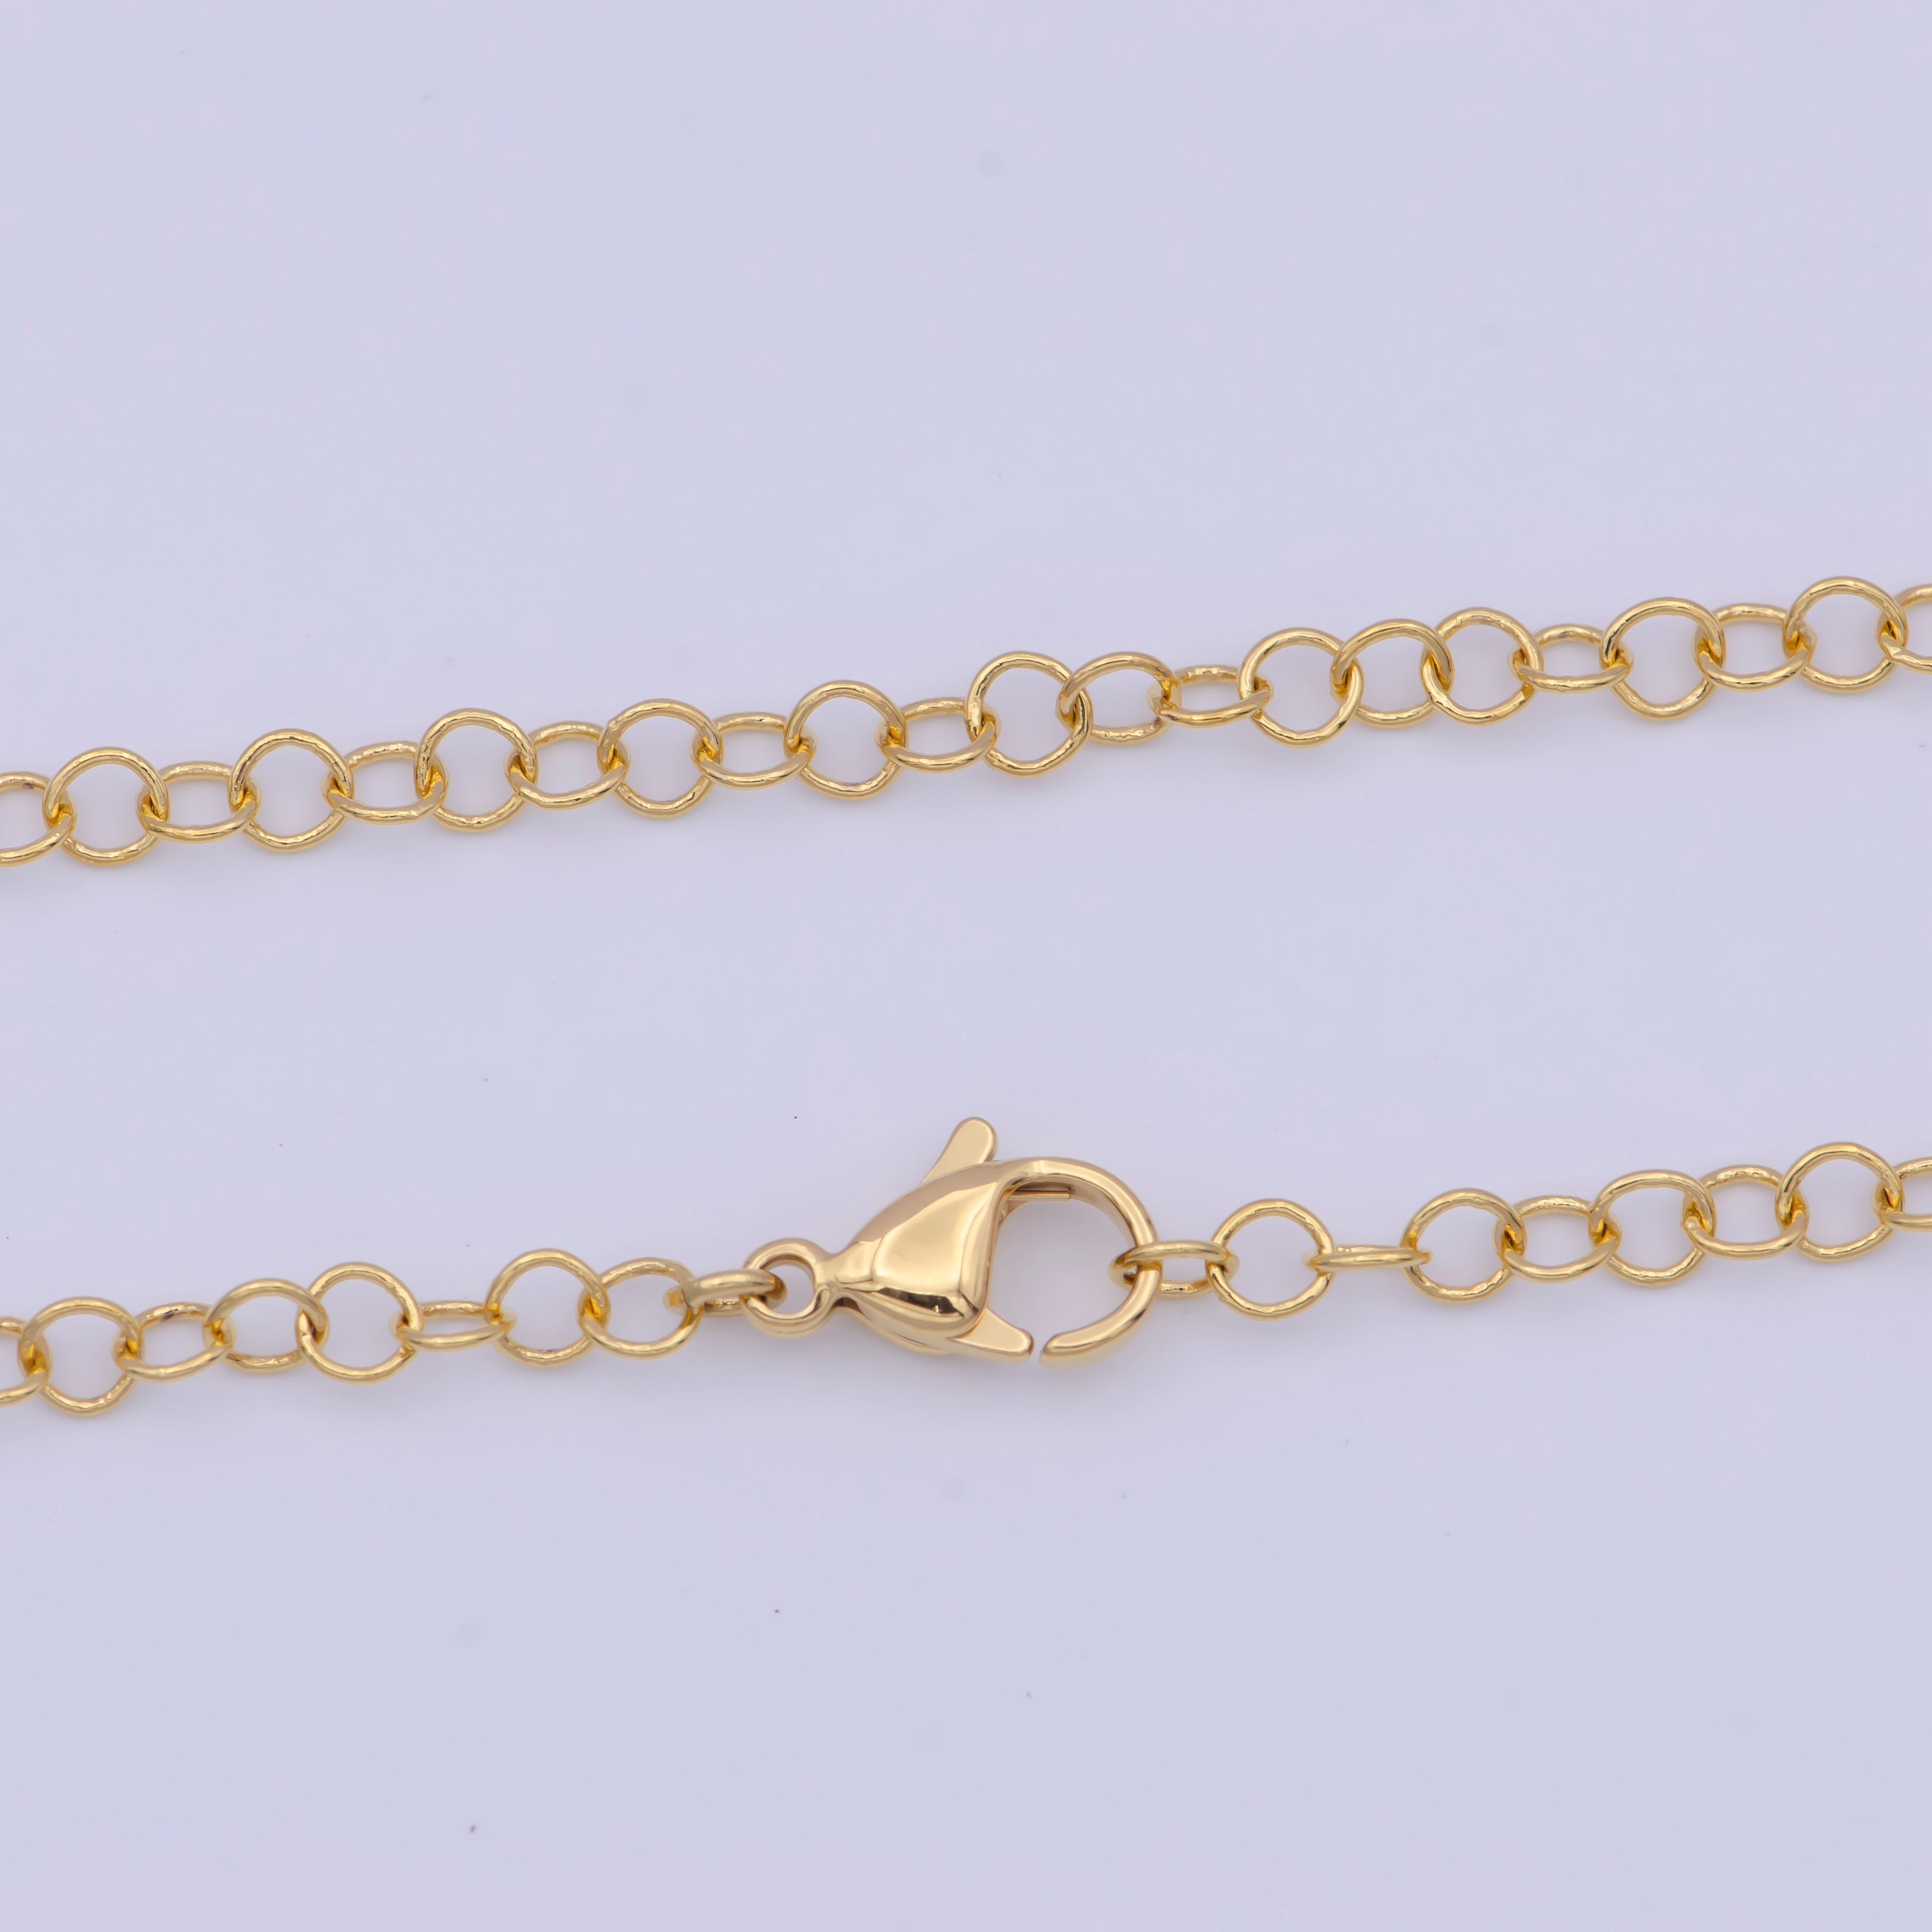 1pc 17" Ready to Wear Gold Filled Chain with Lobster Clasp, Simple Everyday Layering Necklace WA-1119 - DLUXCA